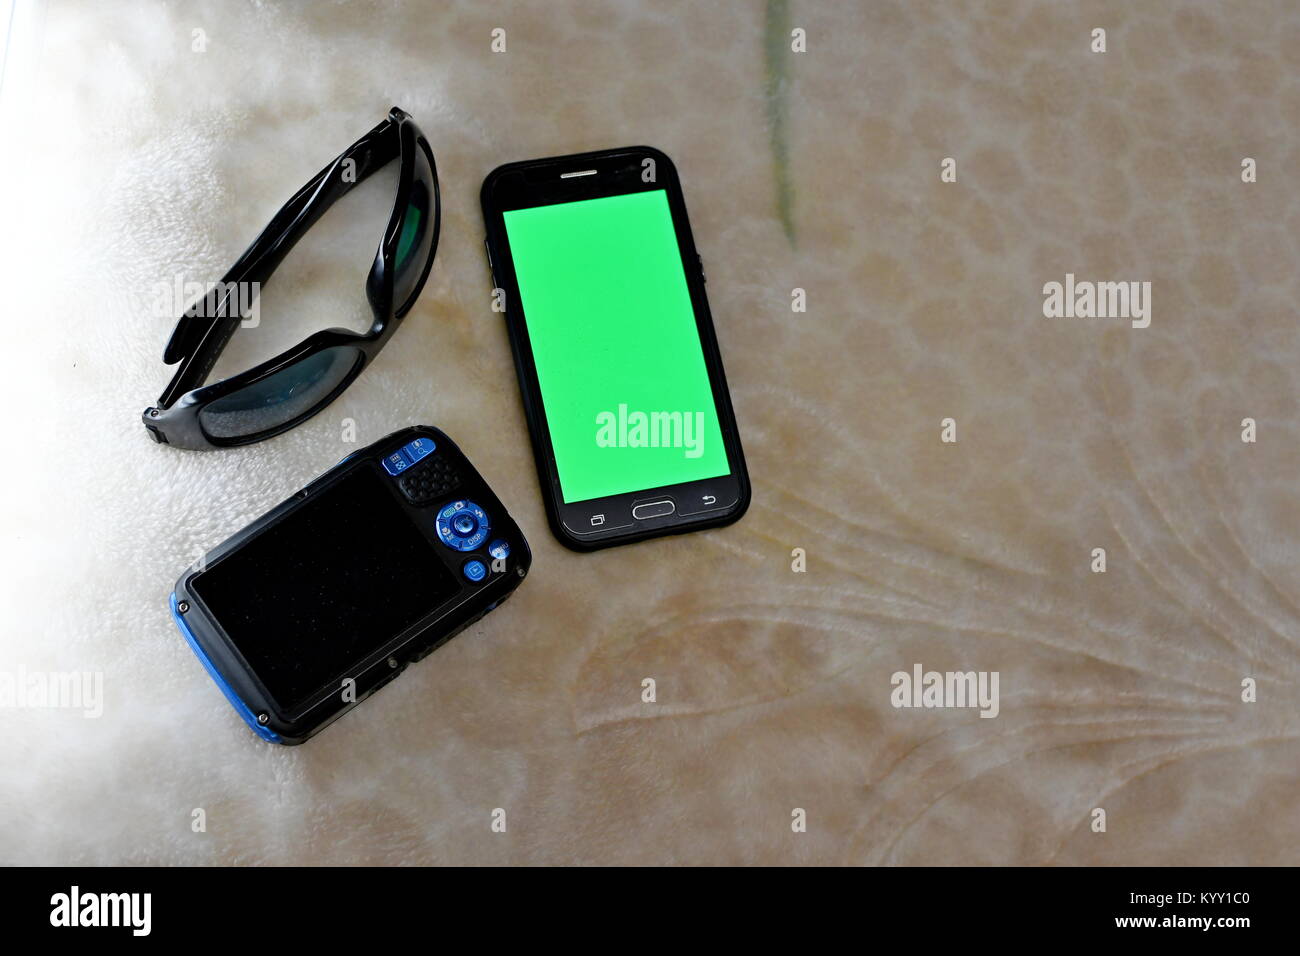 Green screen ready phone for website uploads and web design Stock Photo